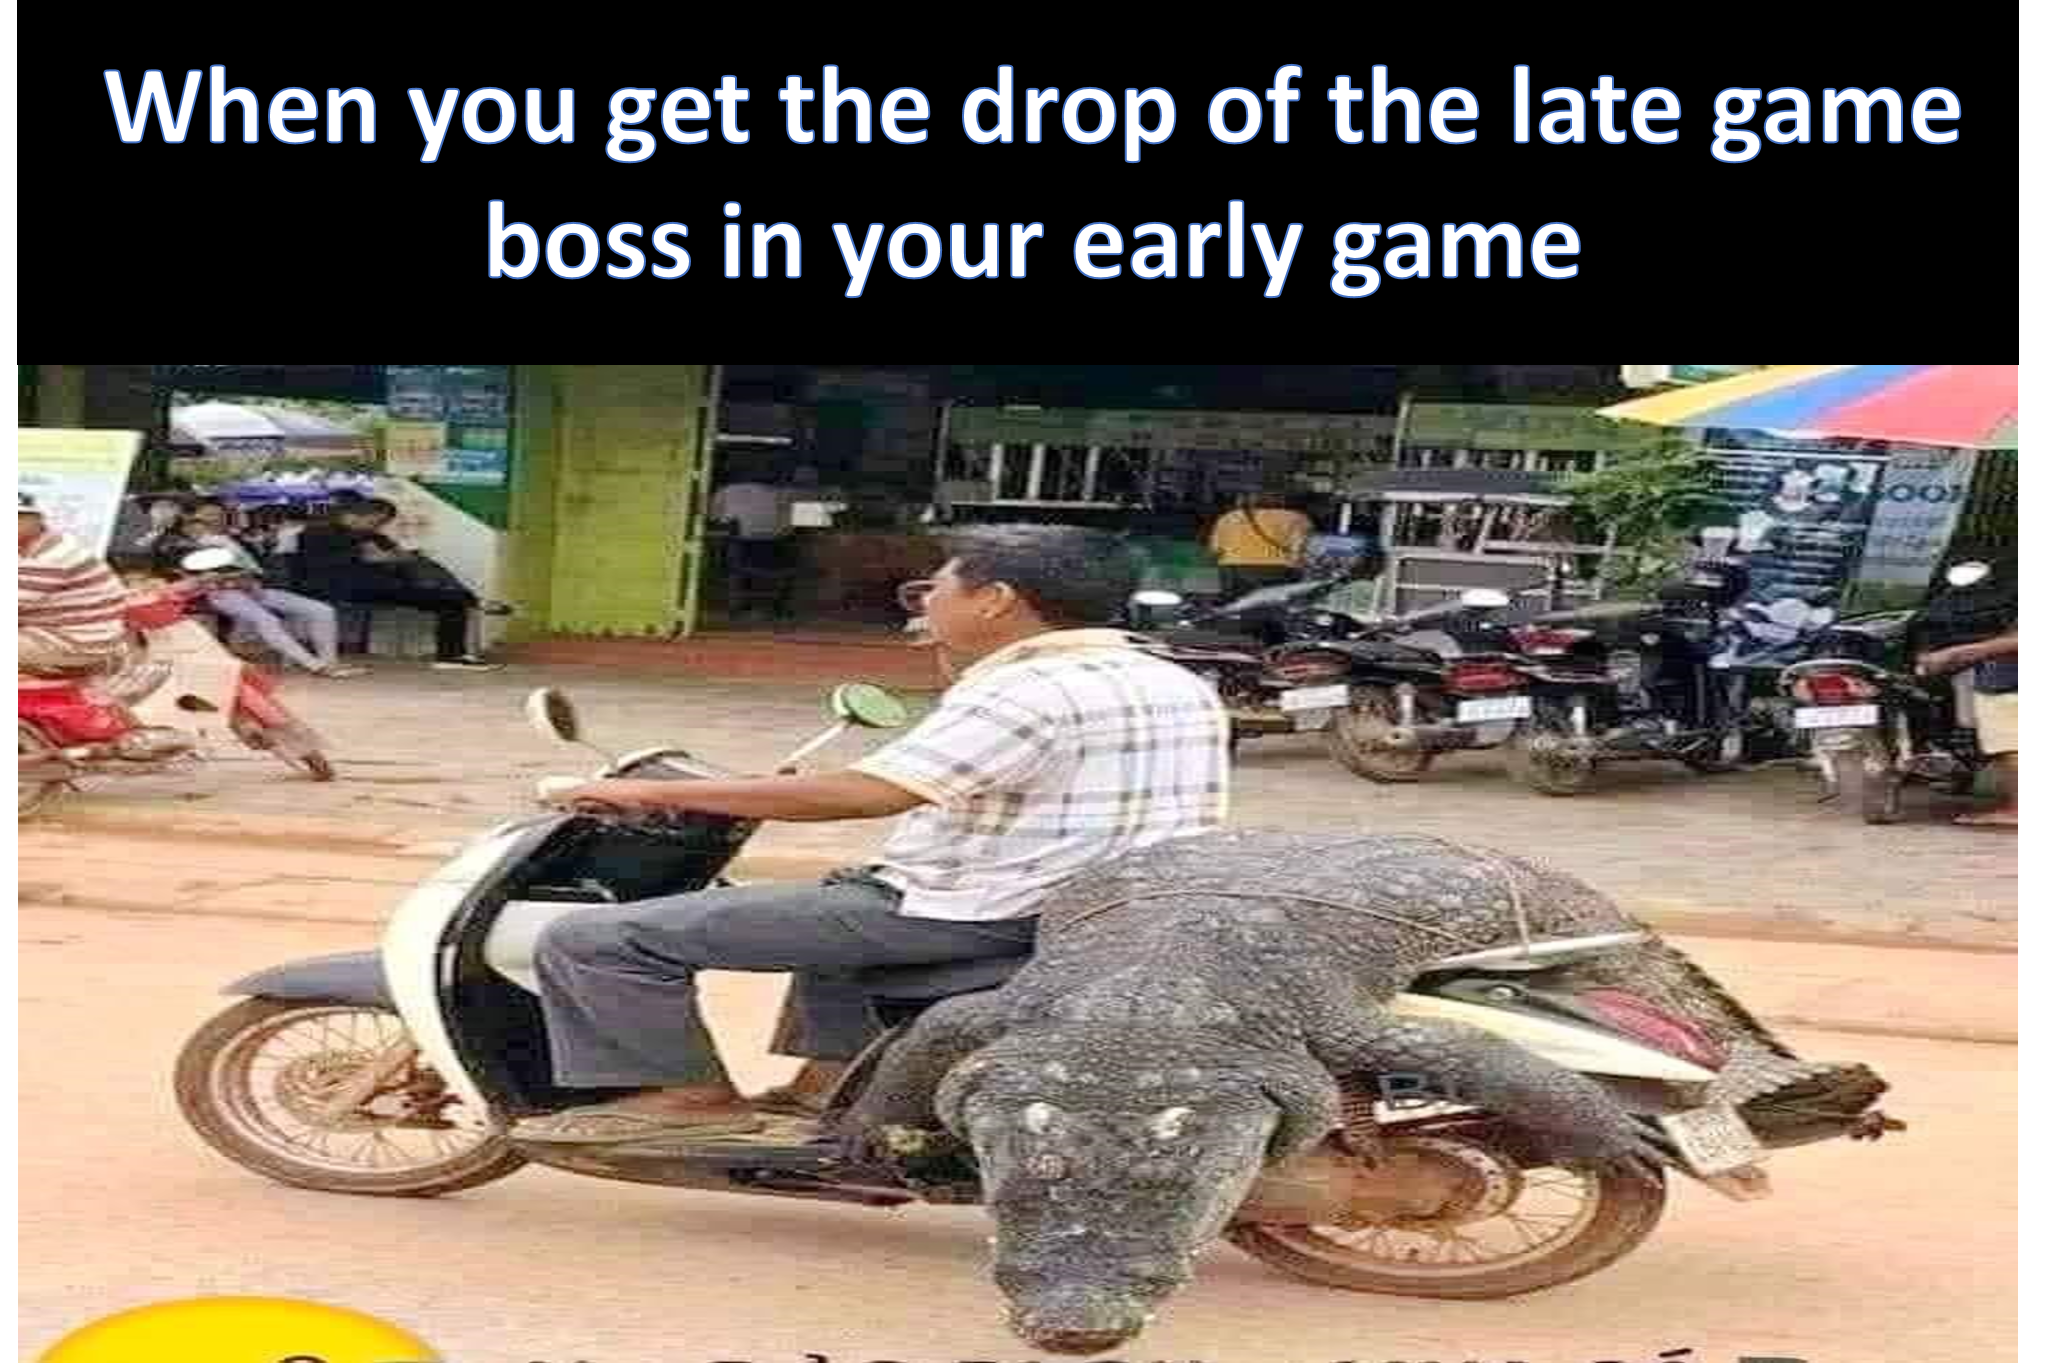 kubur - When you get the drop of the late game boss in your early game